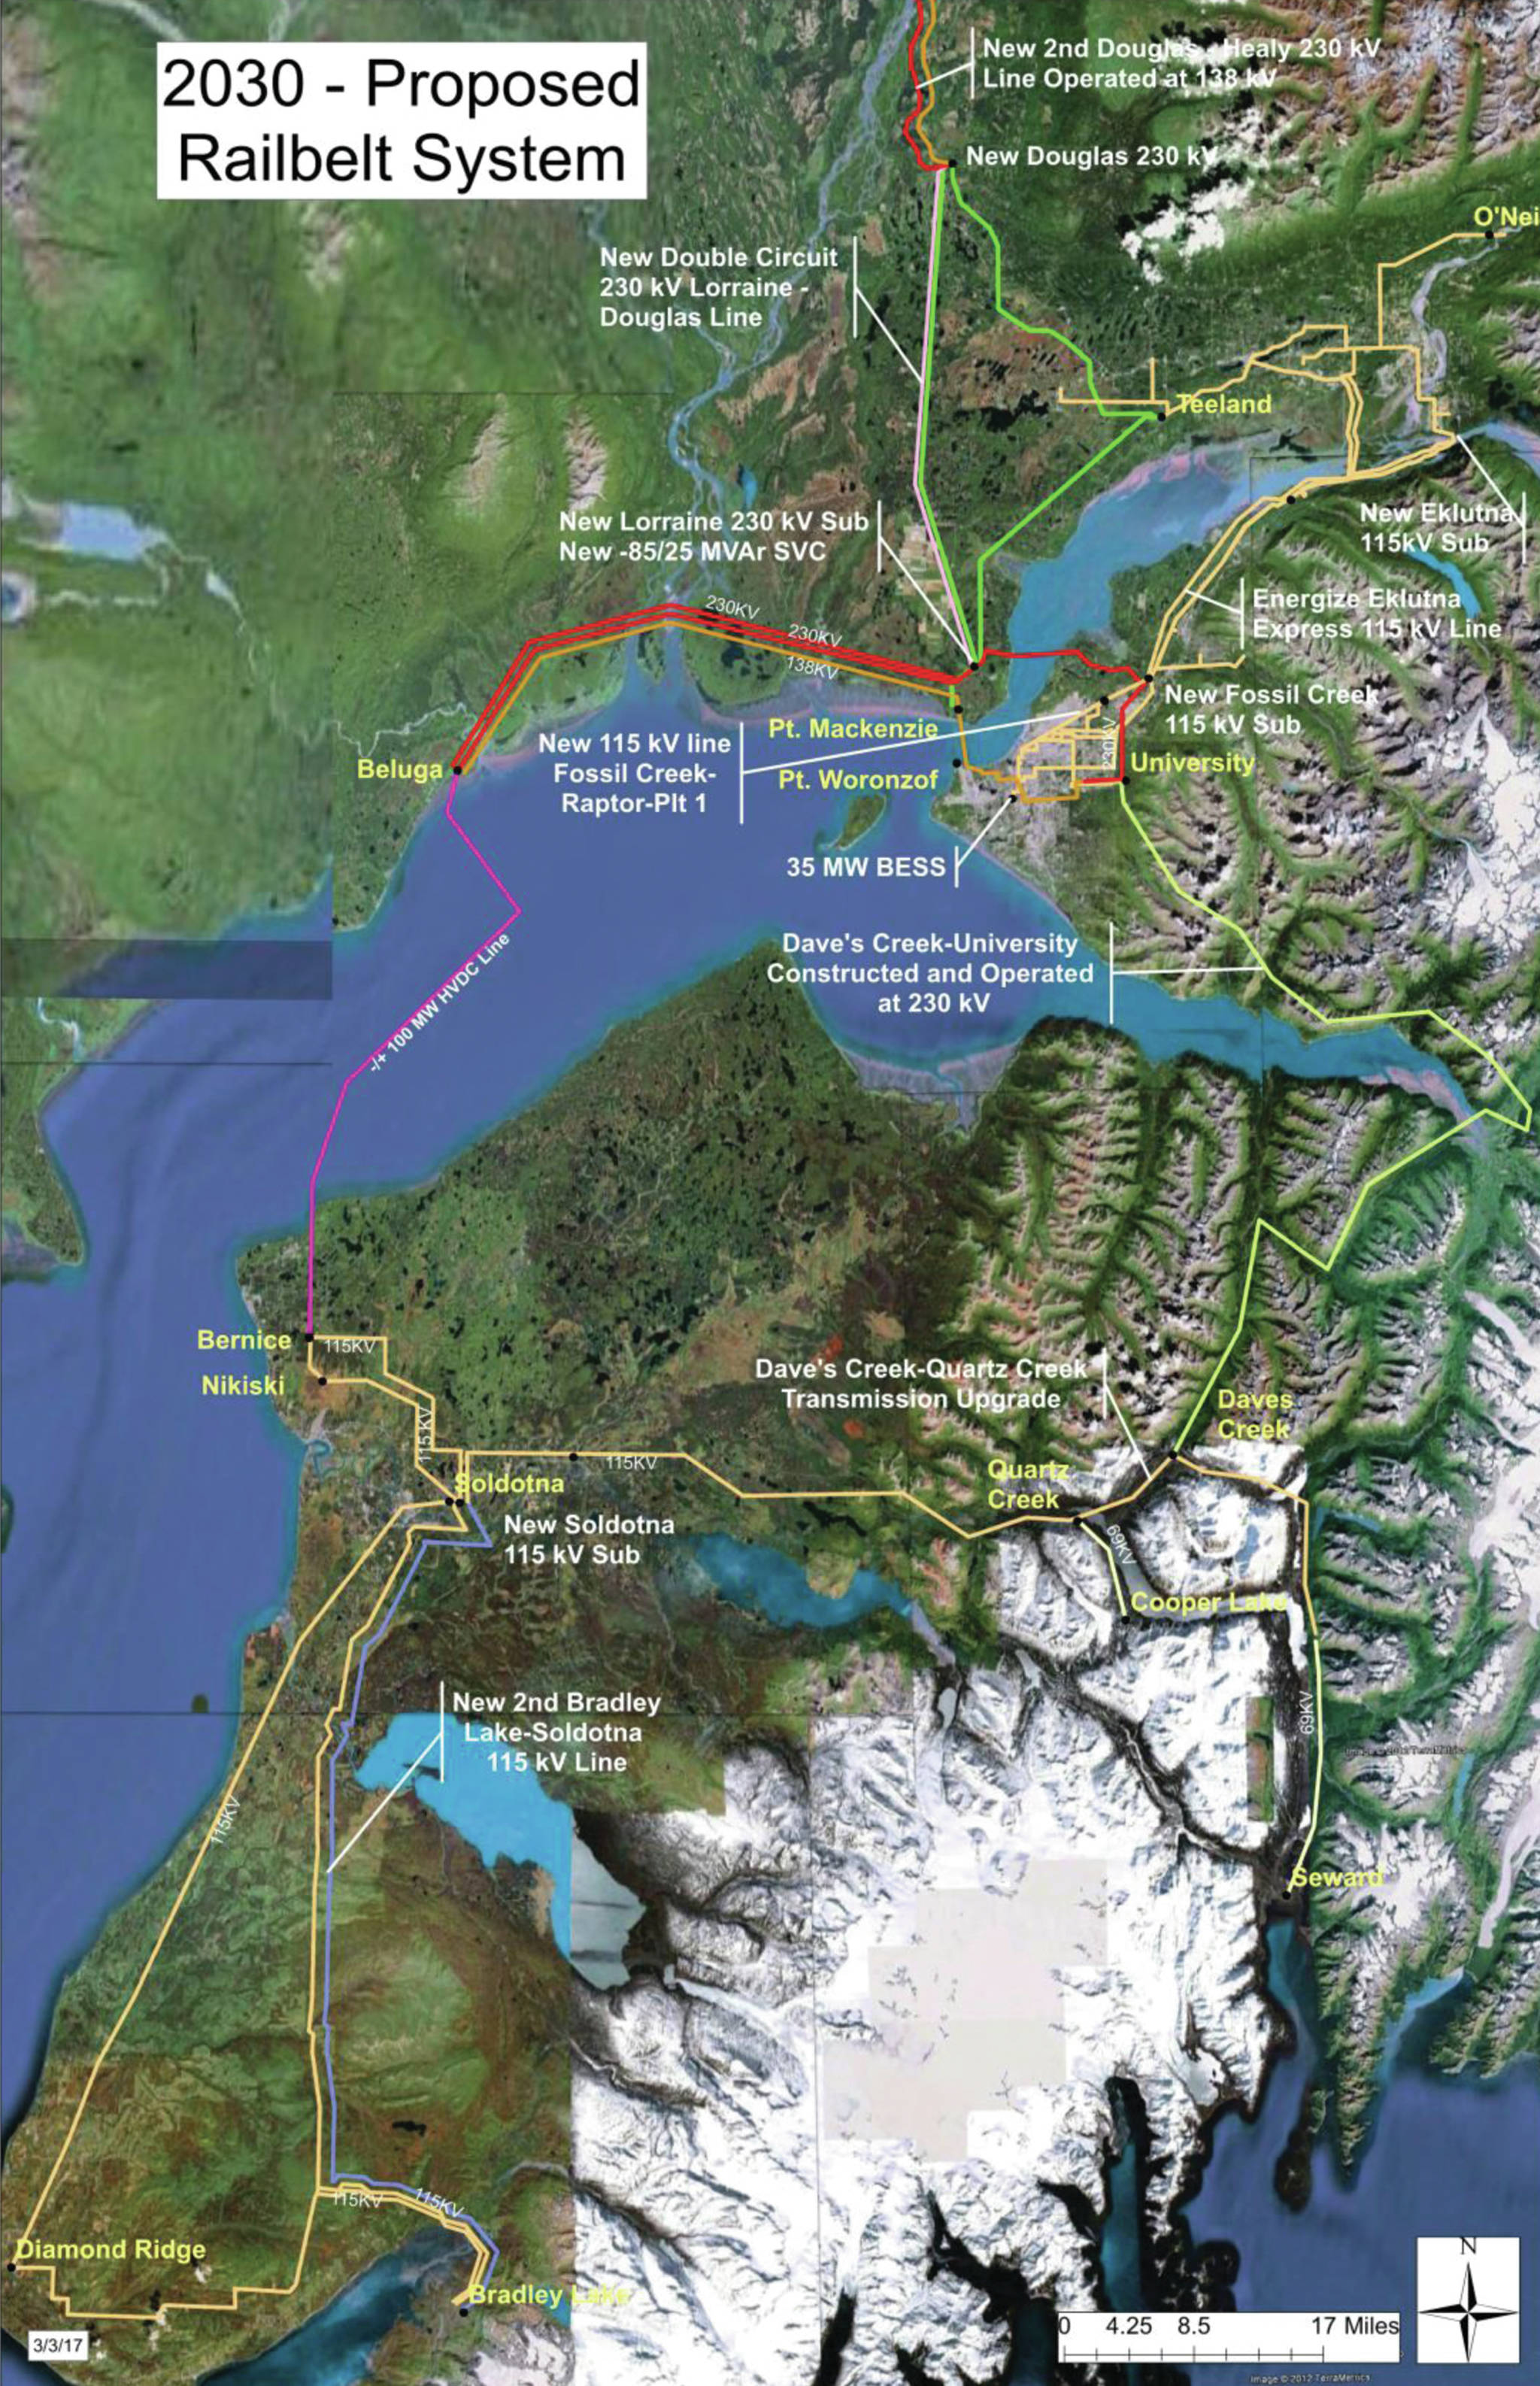 The roughly $400 million in southern Railbelt electric transmission upgrades proposed by the Alaska Energy Authority can be seen in this map as the blue, pink and red lines running from Bradley Lake to north of Anchorage. The existing lines are in green. Major investments are needed to improve efficiency and reliability in the region’s currently strained electric transmission system, the state-owned authority contends. (Map/Courtesy/Alaska Energy Authority)